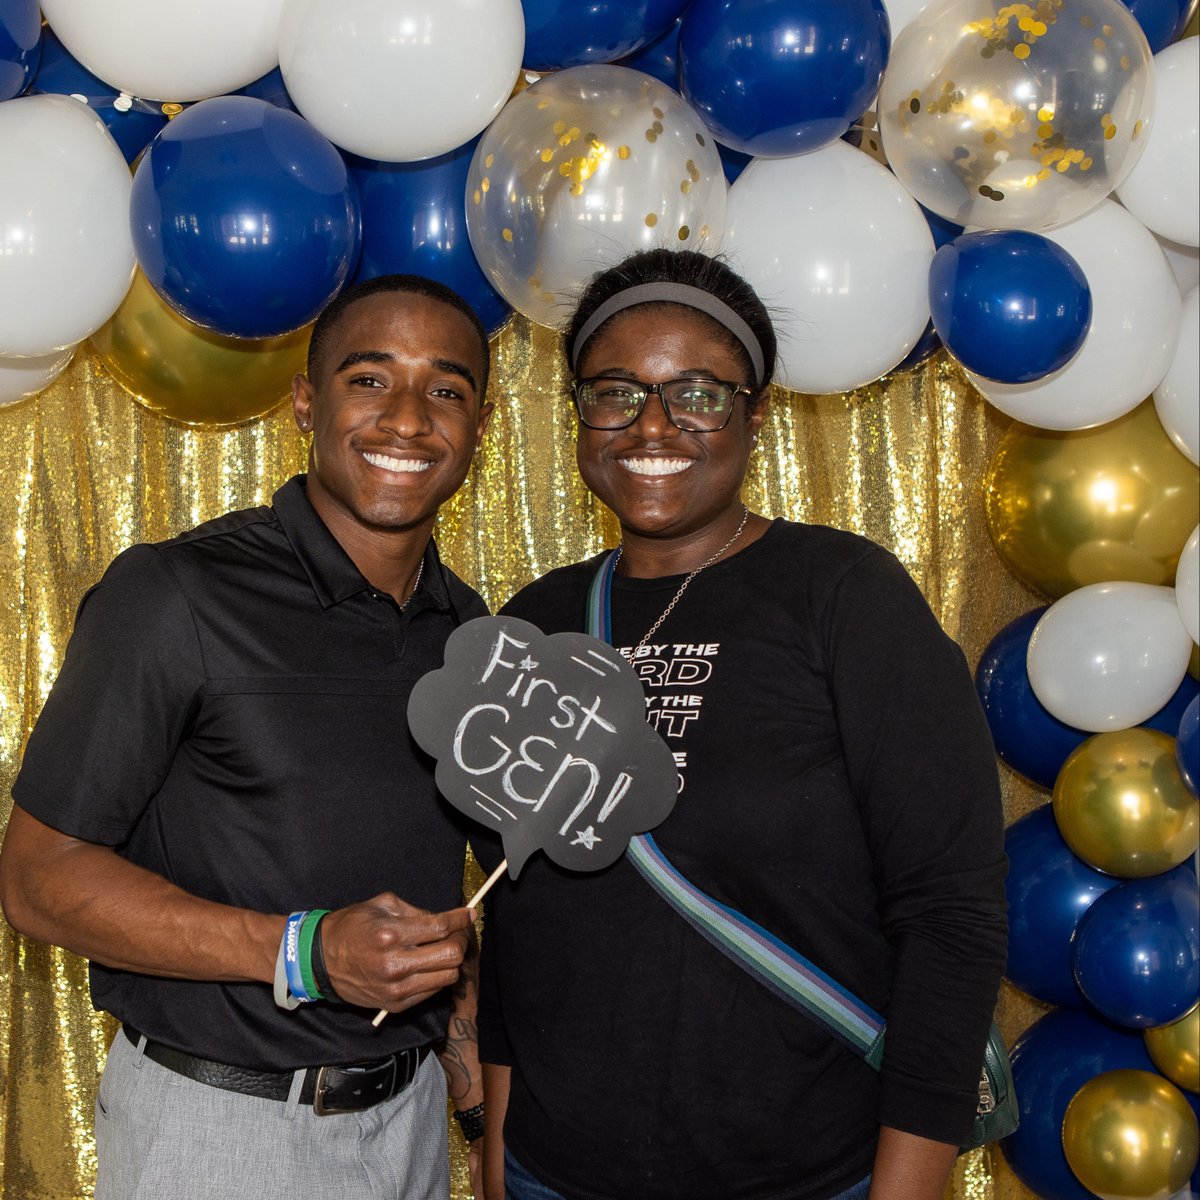 Celebrating #firstgeneration grads! 🎉 TU hosted the second annual cord ceremony and dinner for #utulsa students who are the first in their families to graduate college. 🎓 We are so proud of our first-generation students & all they've accomplished! #tulsa #students #graduation